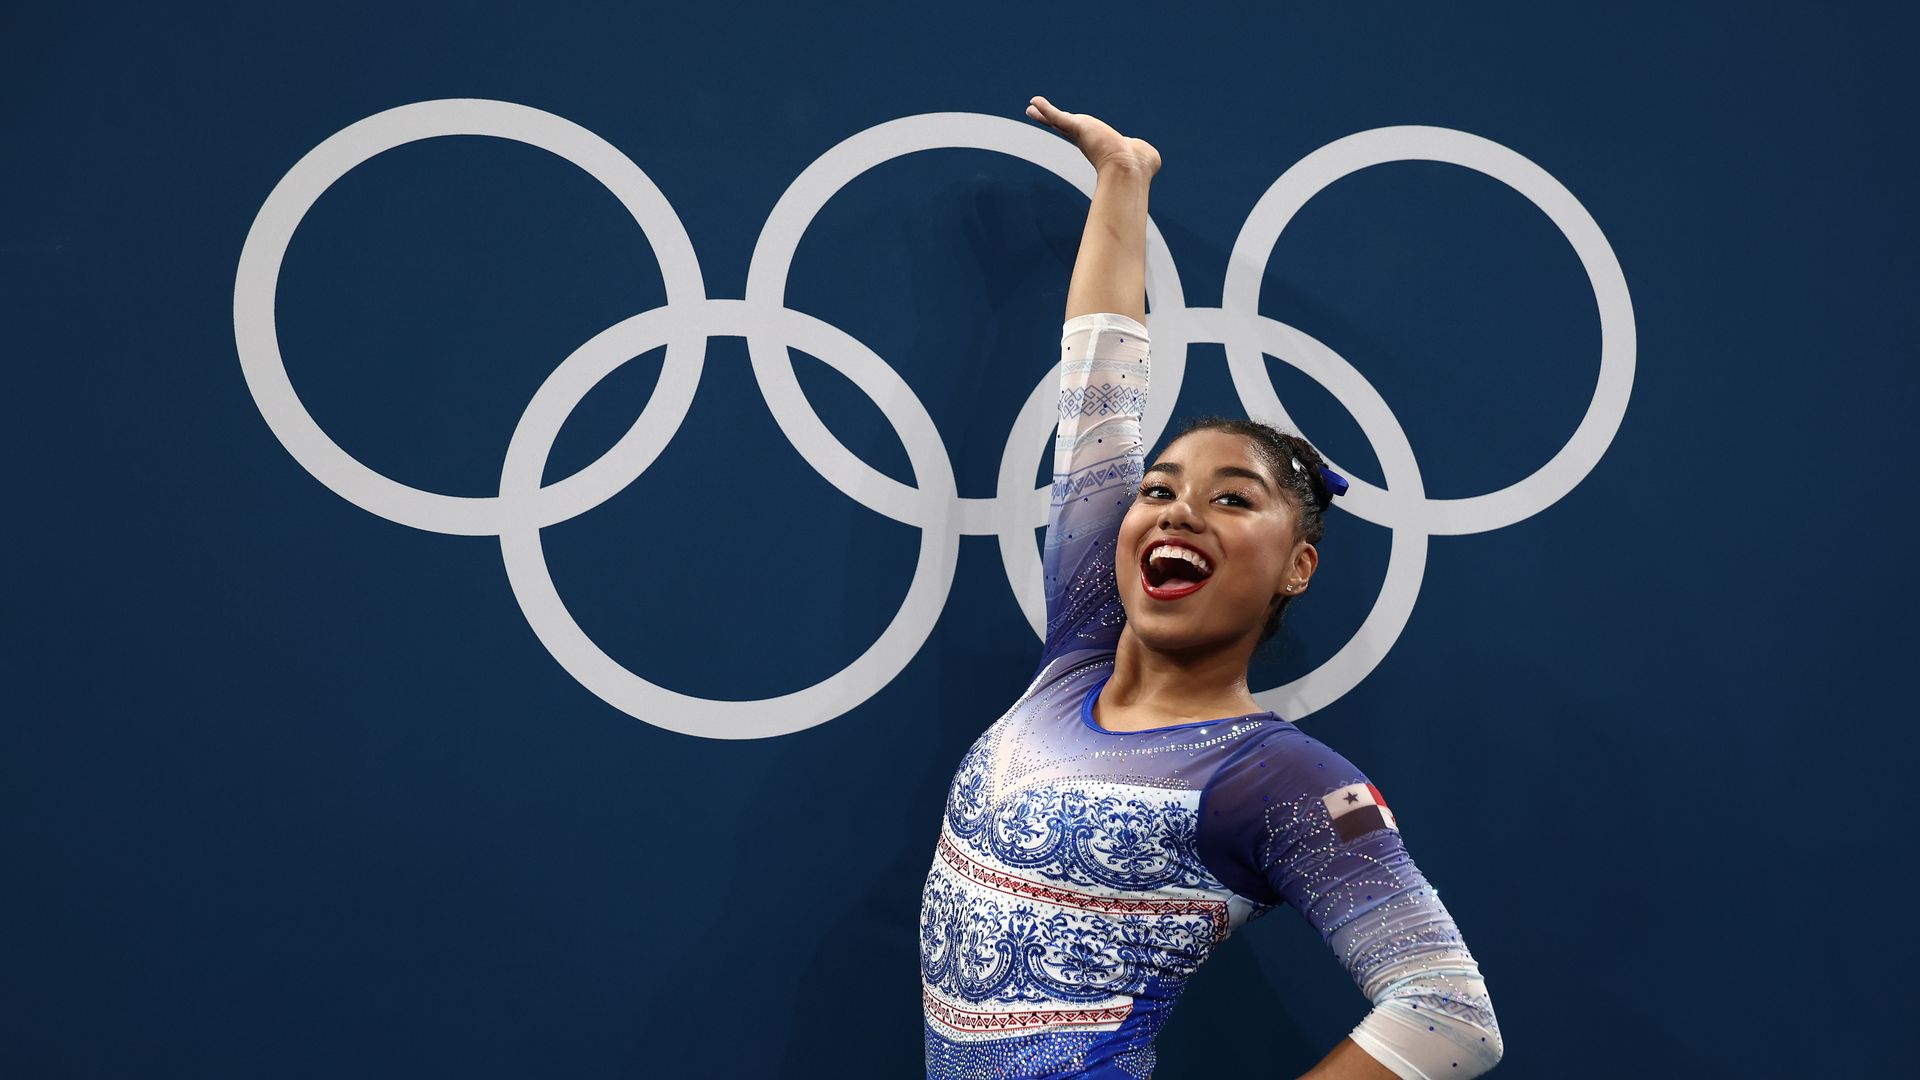 Hillary Heron of Team Panama poses for a photo with the Olympic Rings during the Artistic Gymnastics Women's Qualification on day two of the Olympic Games Paris 2024 at Bercy Arena on July 28, 2024, in Paris, France. 